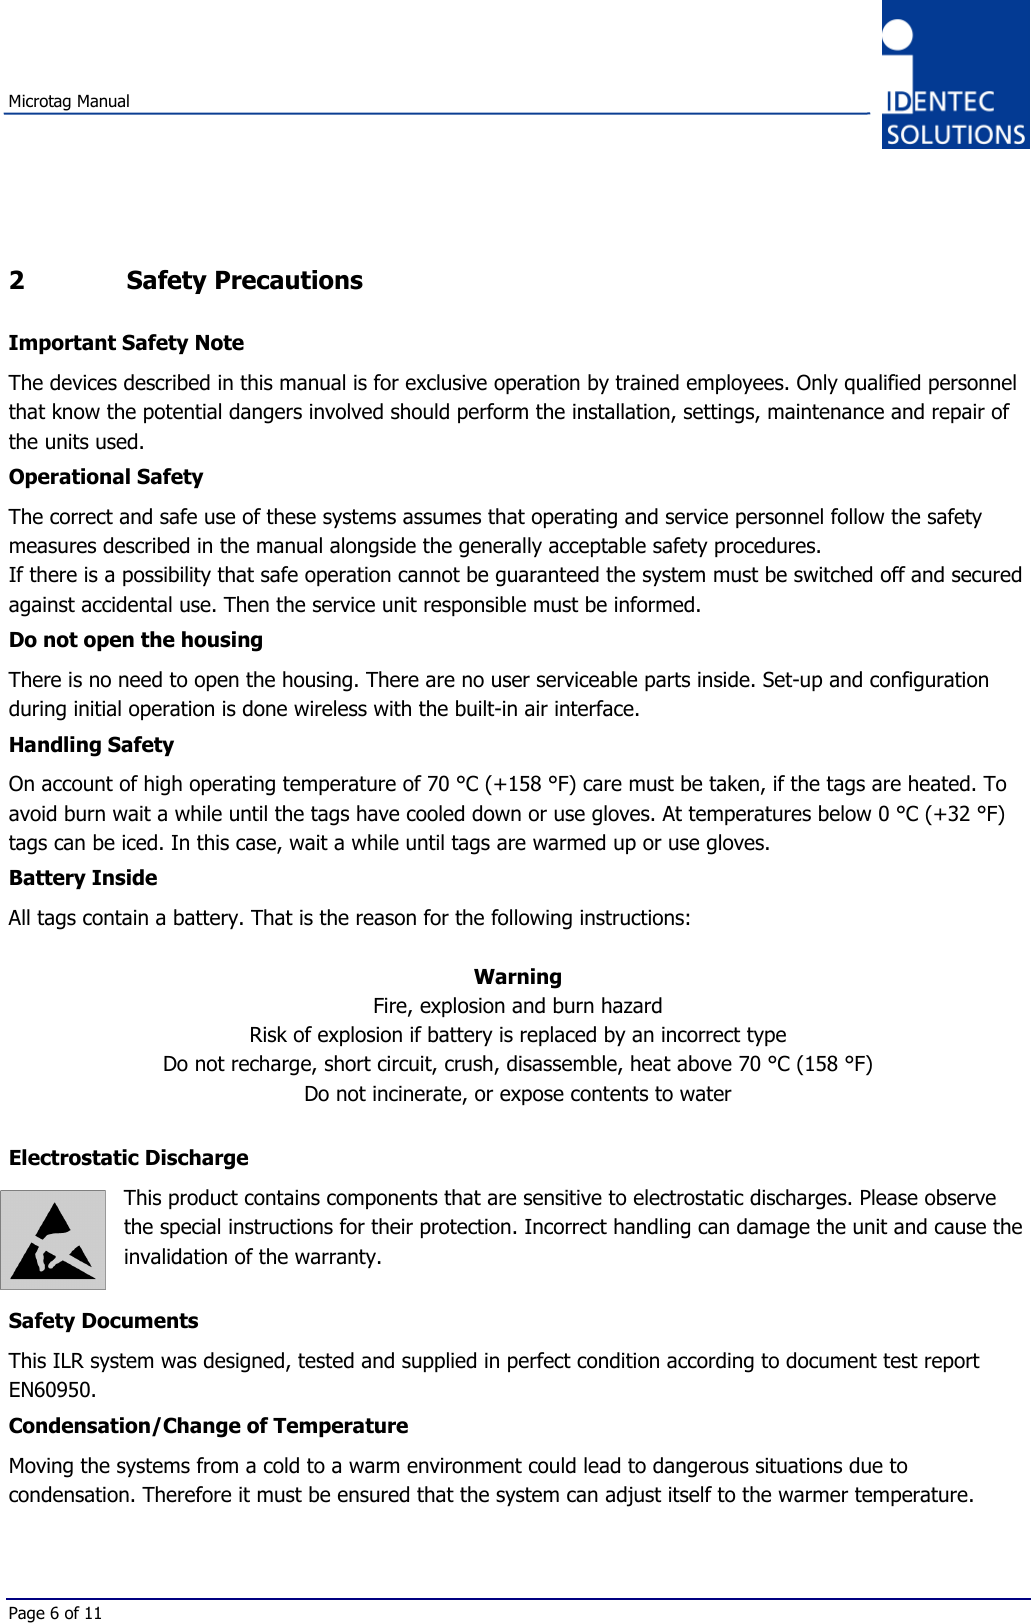 Microtag ManualPage 6 of 112 Safety PrecautionsImportant Safety NoteThe devices described in this manual is for exclusive operation by trained employees. Only qualified personnelthat know the potential dangers involved should perform the installation, settings, maintenance and repair ofthe units used.Operational SafetyThe correct and safe use of these systems assumes that operating and service personnel follow the safetymeasures described in the manual alongside the generally acceptable safety procedures.If there is a possibility that safe operation cannot be guaranteed the system must be switched off and securedagainst accidental use. Then the service unit responsible must be informed.Do not open the housingThere is no need to open the housing. There are no user serviceable parts inside. Set-up and configurationduring initial operation is done wireless with the built-in air interface.Handling SafetyOn account of high operating temperature of 70 °C (+158 °F) care must be taken, if the tags are heated. Toavoid burn wait a while until the tags have cooled down or use gloves. At temperatures below 0 °C (+32 °F)tags can be iced. In this case, wait a while until tags are warmed up or use gloves.Battery InsideAll tags contain a battery. That is the reason for the following instructions:WarningFire, explosion and burn hazardRisk of explosion if battery is replaced by an incorrect typeDo not recharge, short circuit, crush, disassemble, heat above 70 °C (158 °F)Do not incinerate, or expose contents to waterElectrostatic DischargeThis product contains components that are sensitive to electrostatic discharges. Please observethe special instructions for their protection. Incorrect handling can damage the unit and cause theinvalidation of the warranty.Safety DocumentsThis ILR system was designed, tested and supplied in perfect condition according to document test reportEN60950.Condensation/Change of TemperatureMoving the systems from a cold to a warm environment could lead to dangerous situations due tocondensation. Therefore it must be ensured that the system can adjust itself to the warmer temperature.